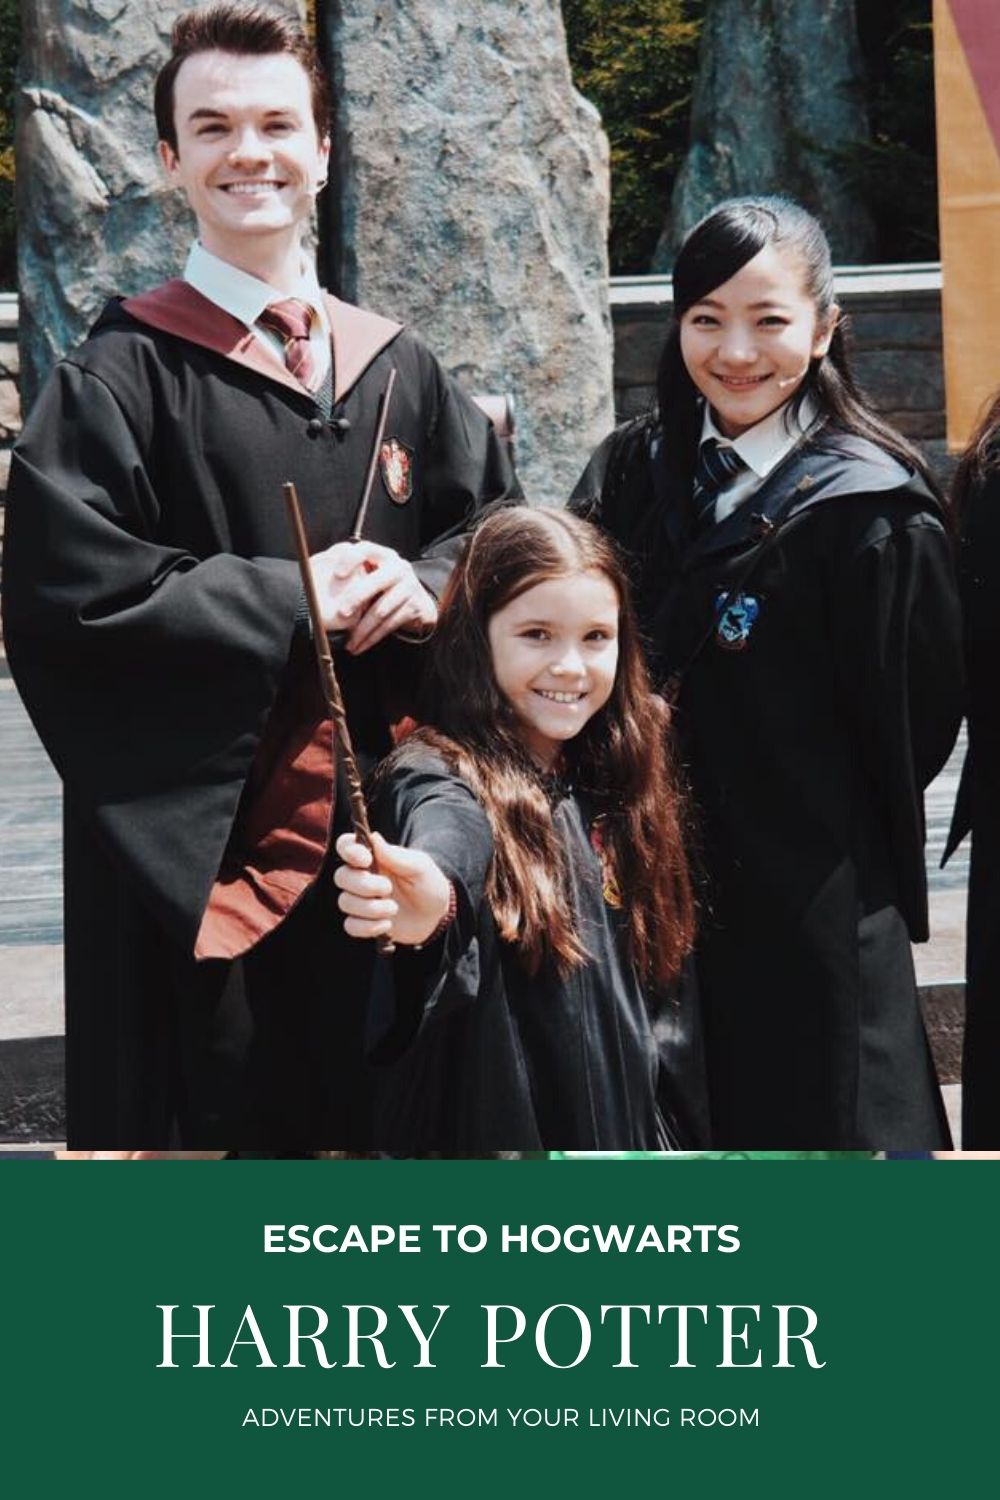 Bring the World of Harry Potter Home for the Kids